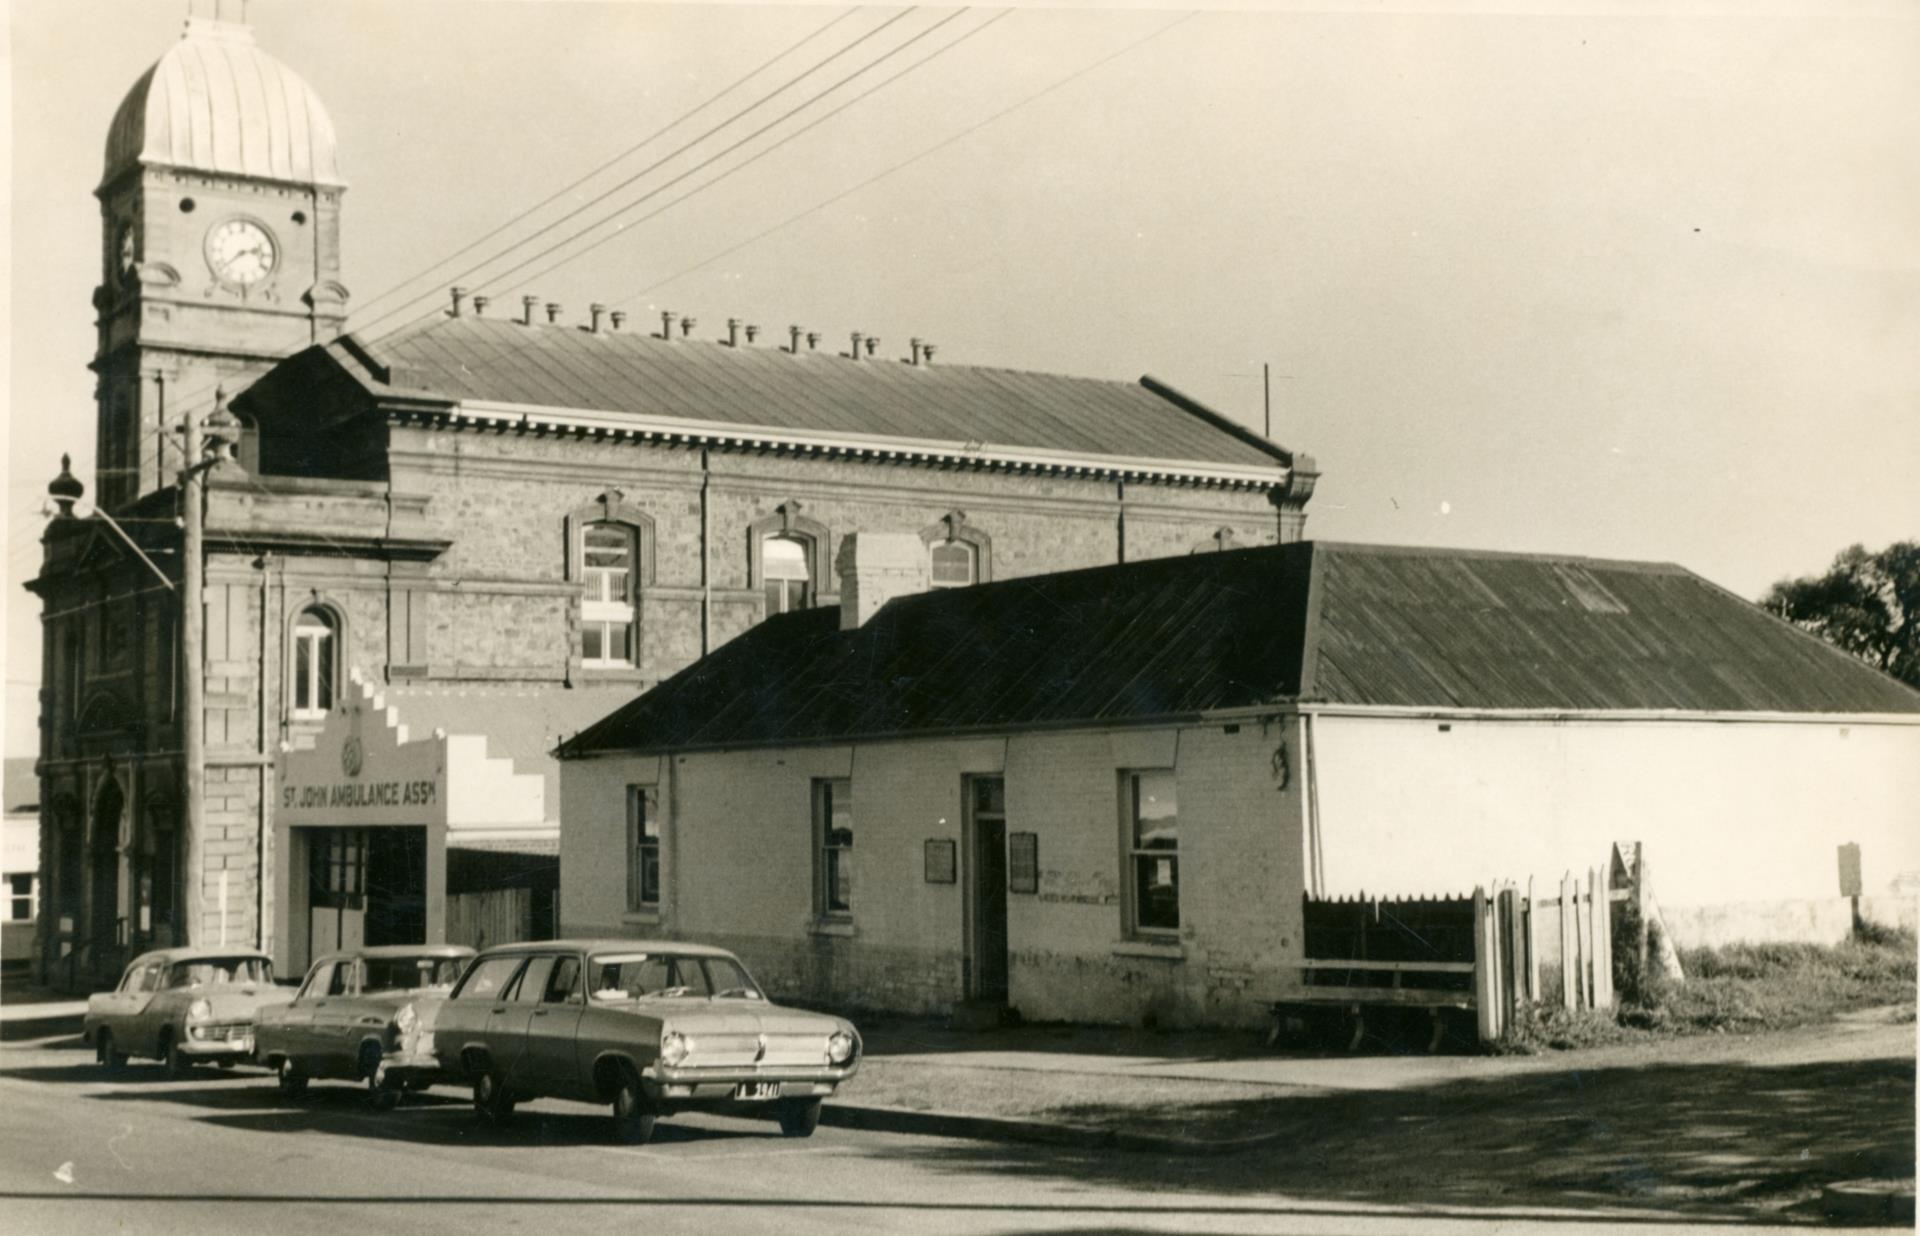 Municipal Library on York Street prior demolition with St Johns Ambulance building and the Town Hall [ca 1966]